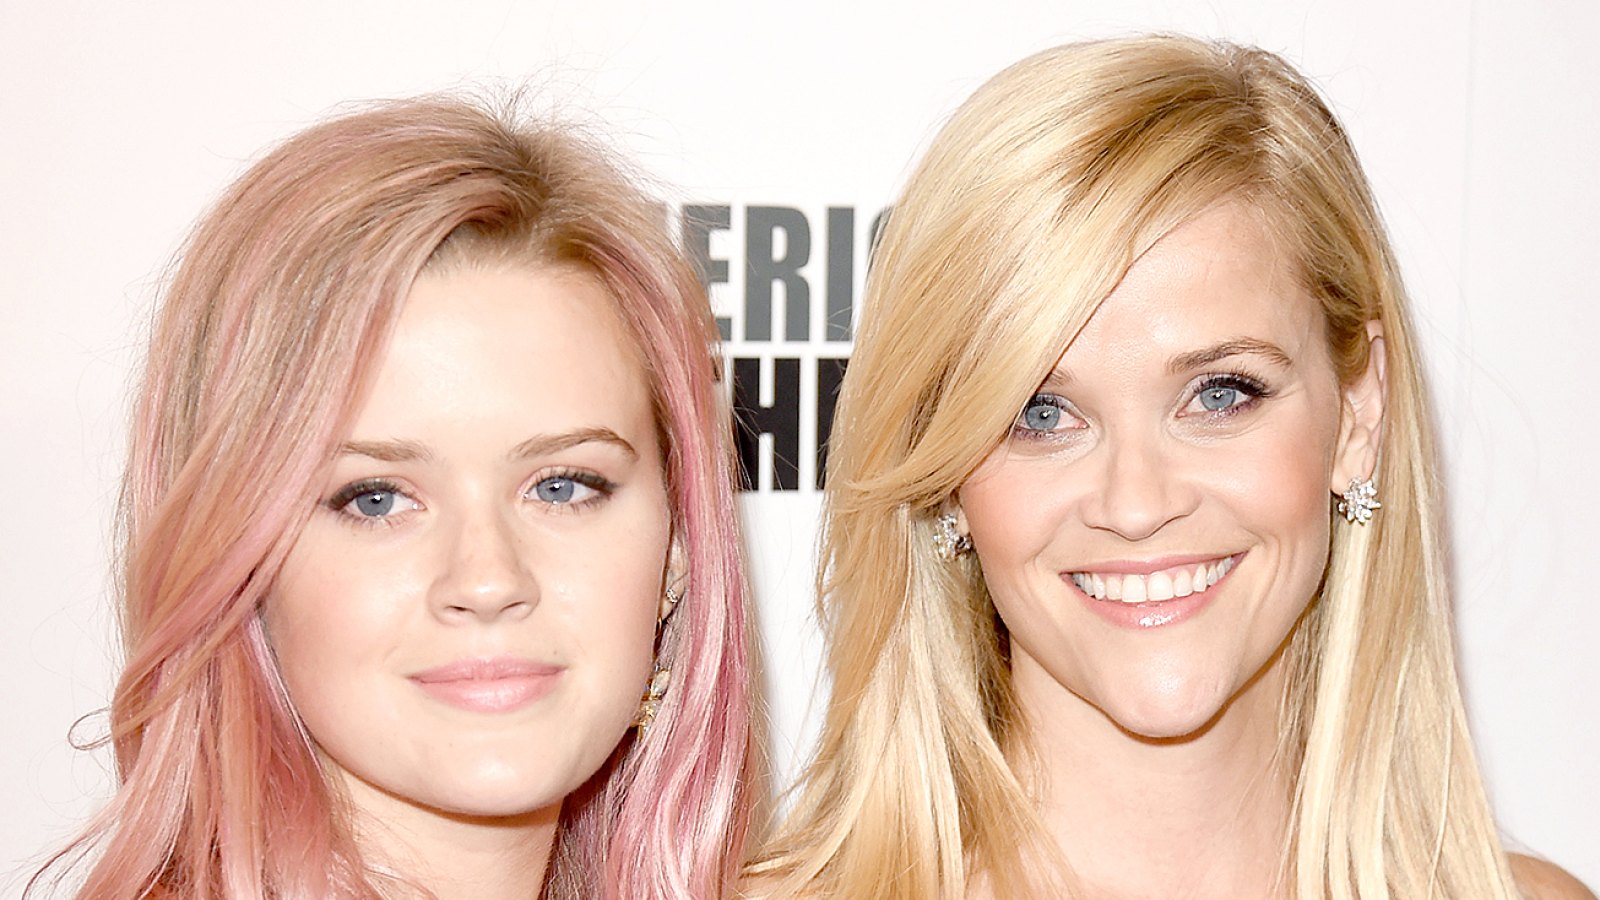 Ava Phillippe and Reese Witherspoon attend the 29th American Cinematheque Award honoring Reese Witherspoon at the Hyatt Regency Century Plaza on October 30, 2015 in Los Angeles, California.